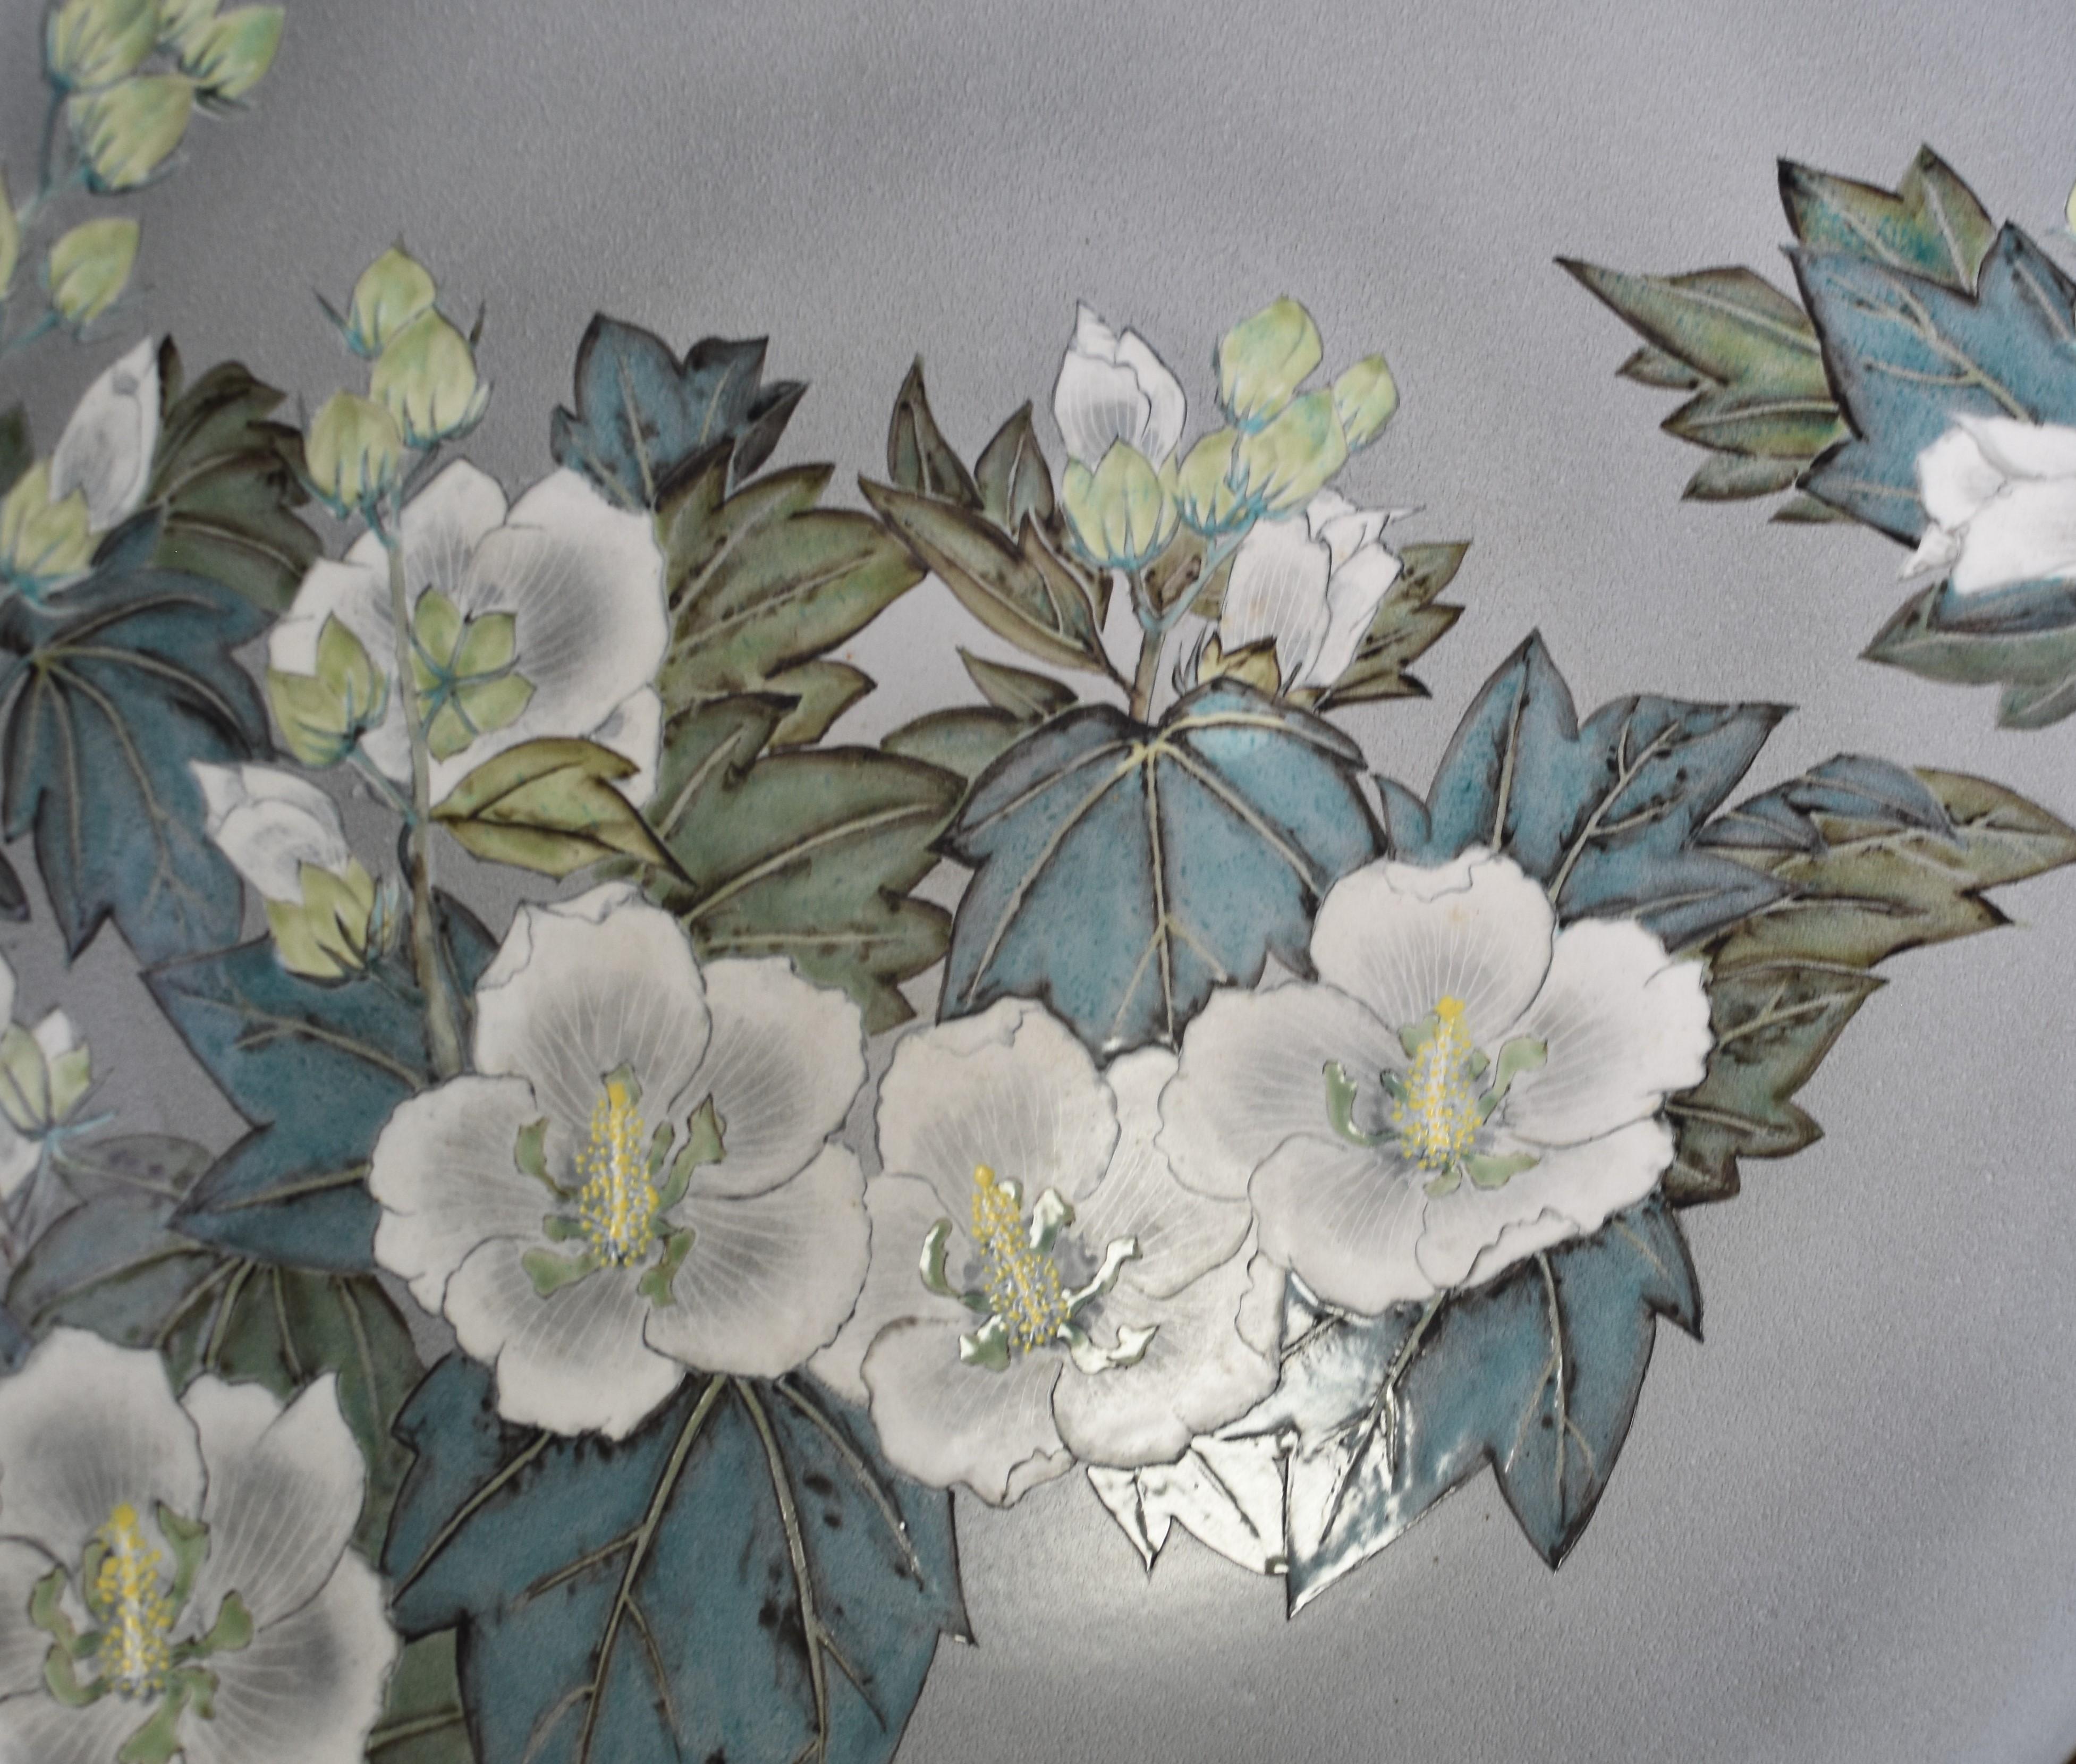 Exquisite very large contemporary ceramic deep charger/centerpiece, hand painted in green, blue and white on an attractive silver/gray background to feature a stunning bold flower and foliage motif that creates a striking contrast against the